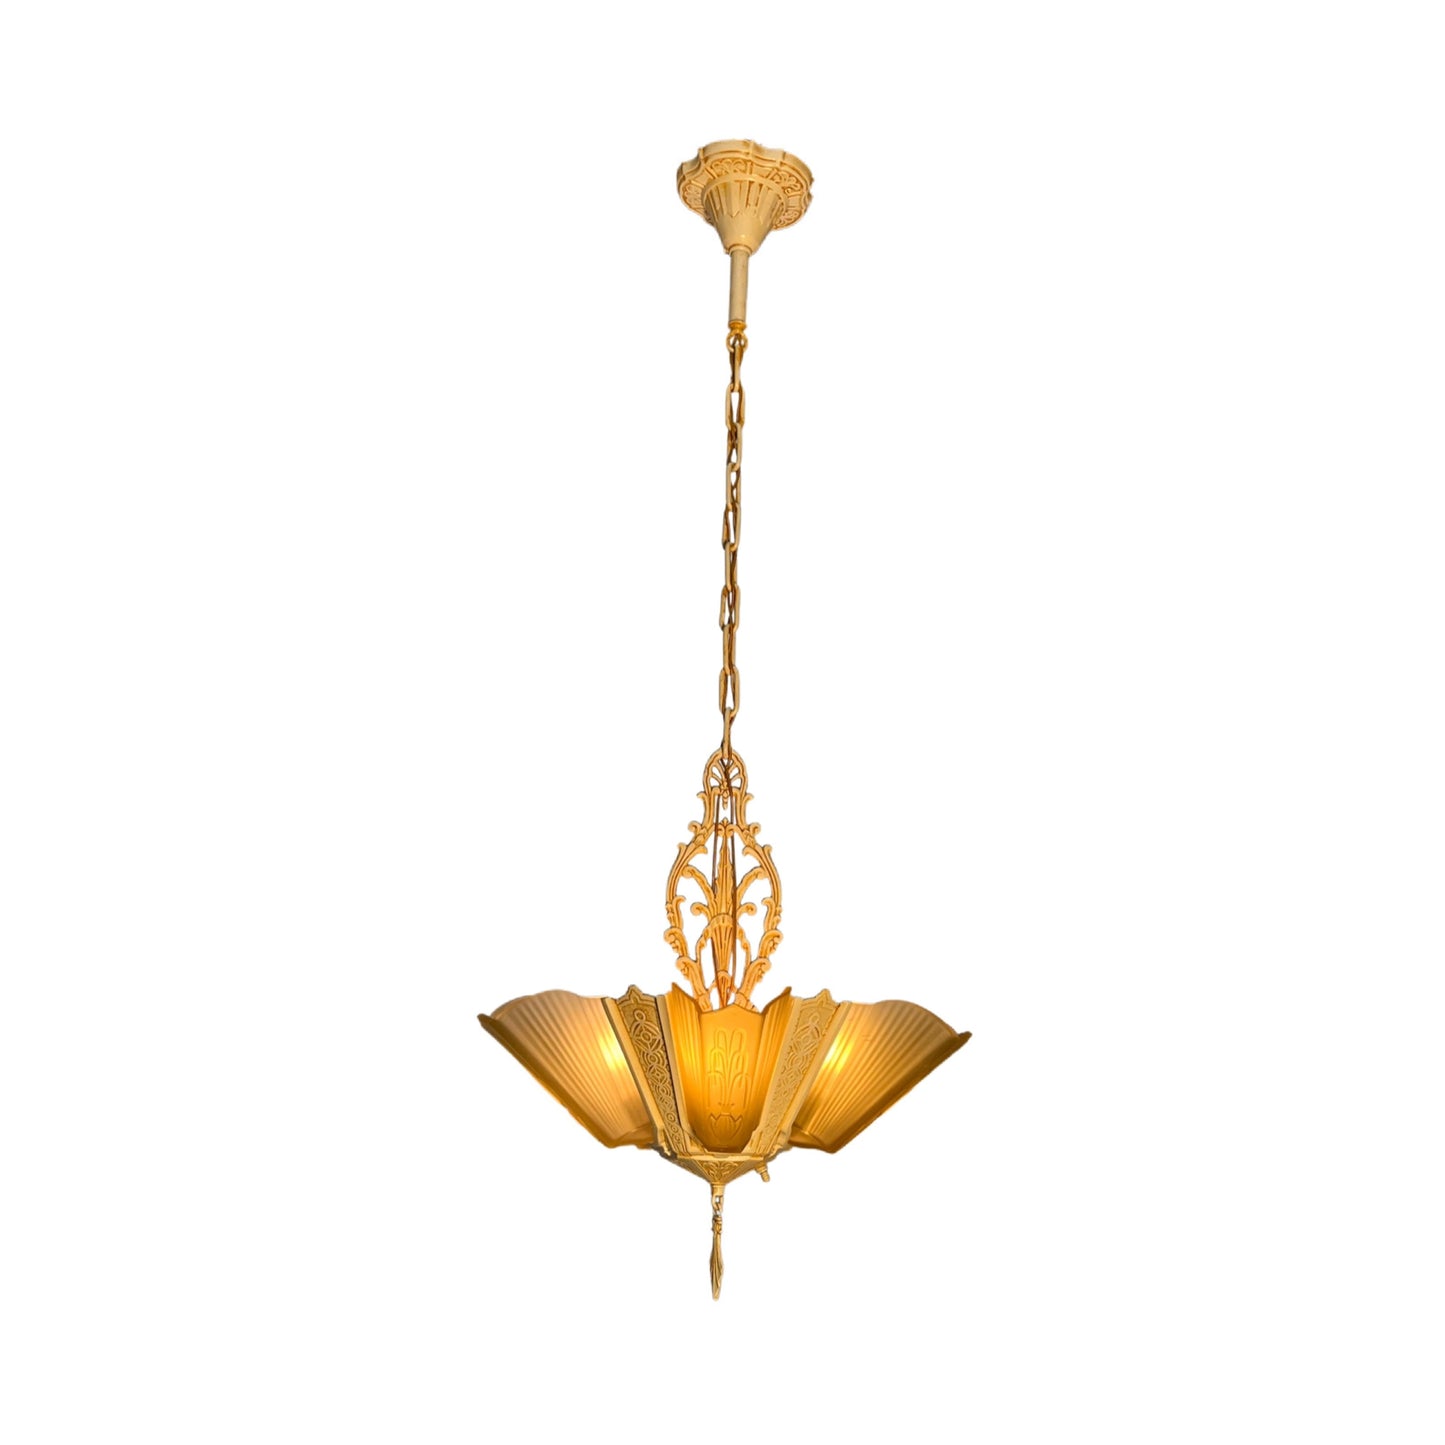 1930s Art Deco Chandelier with Amber Shades and Fountain Design #2329